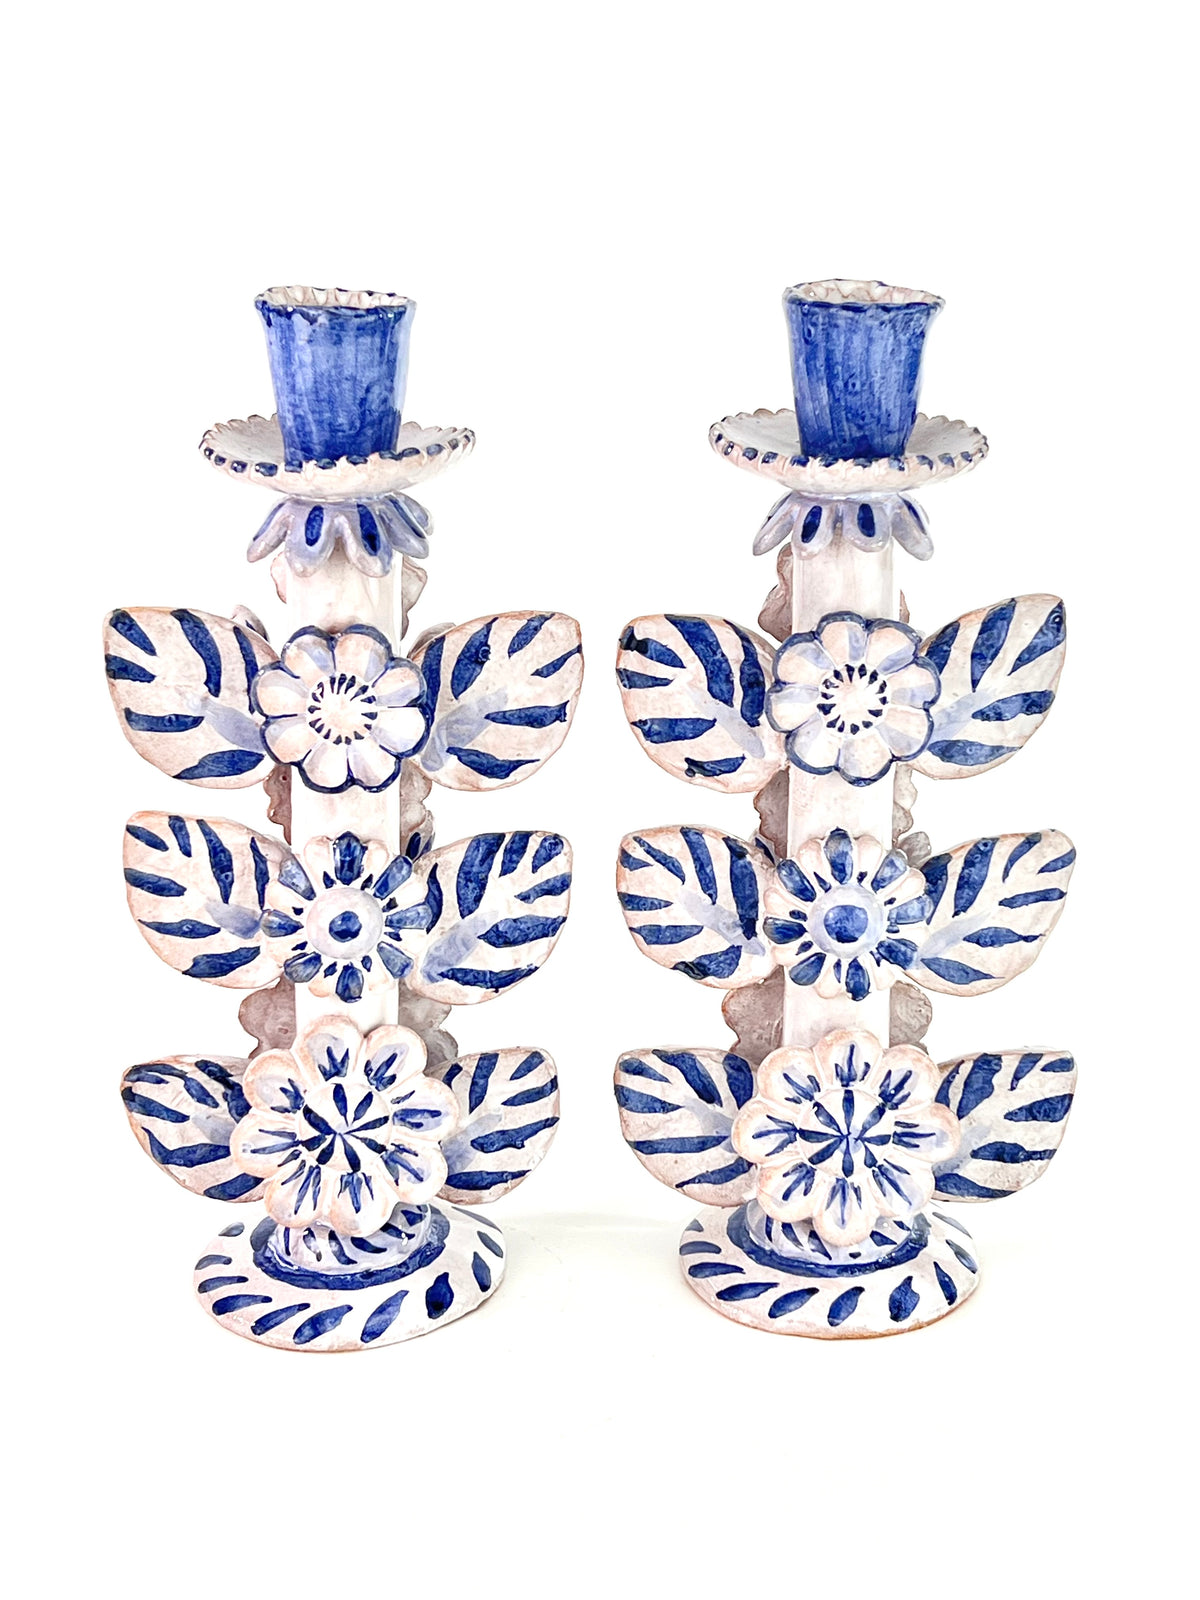 Blue and White Candlesticks Pair